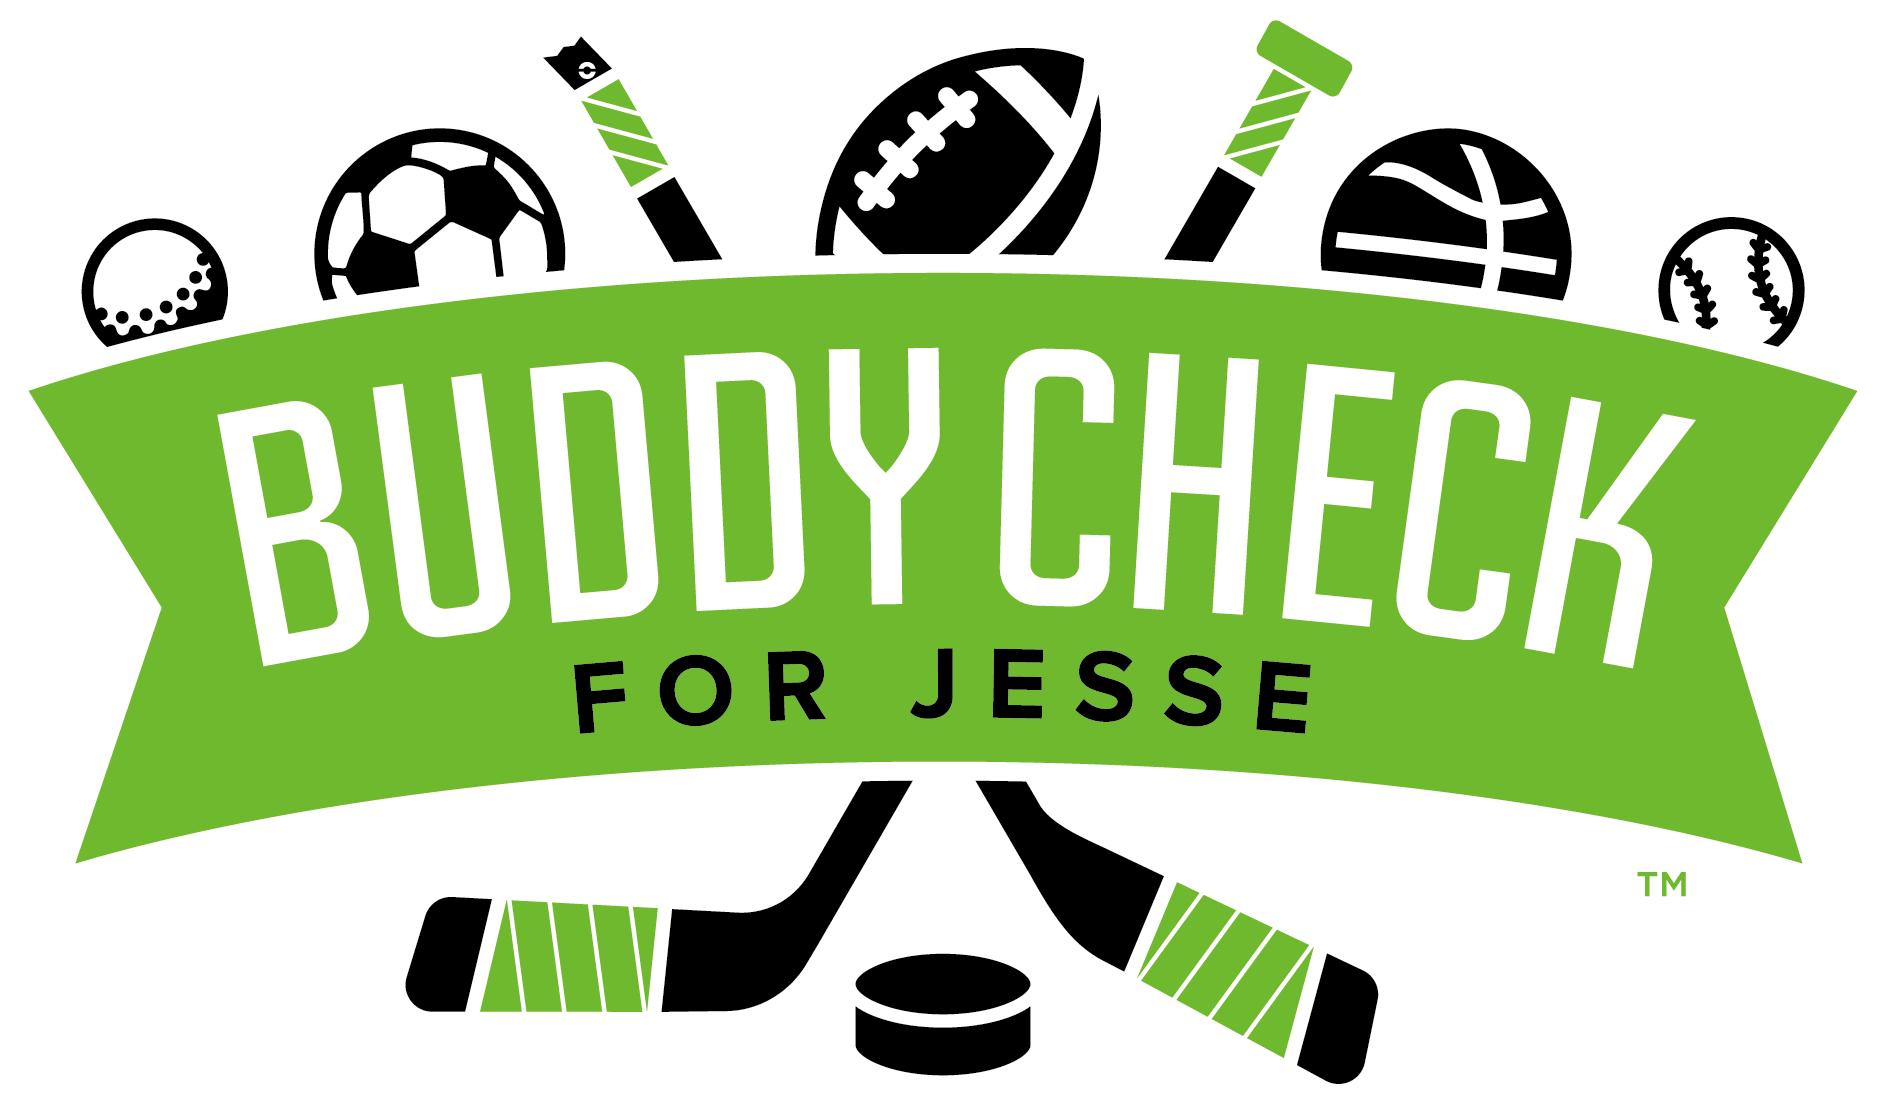 Buddy Check for Jesse